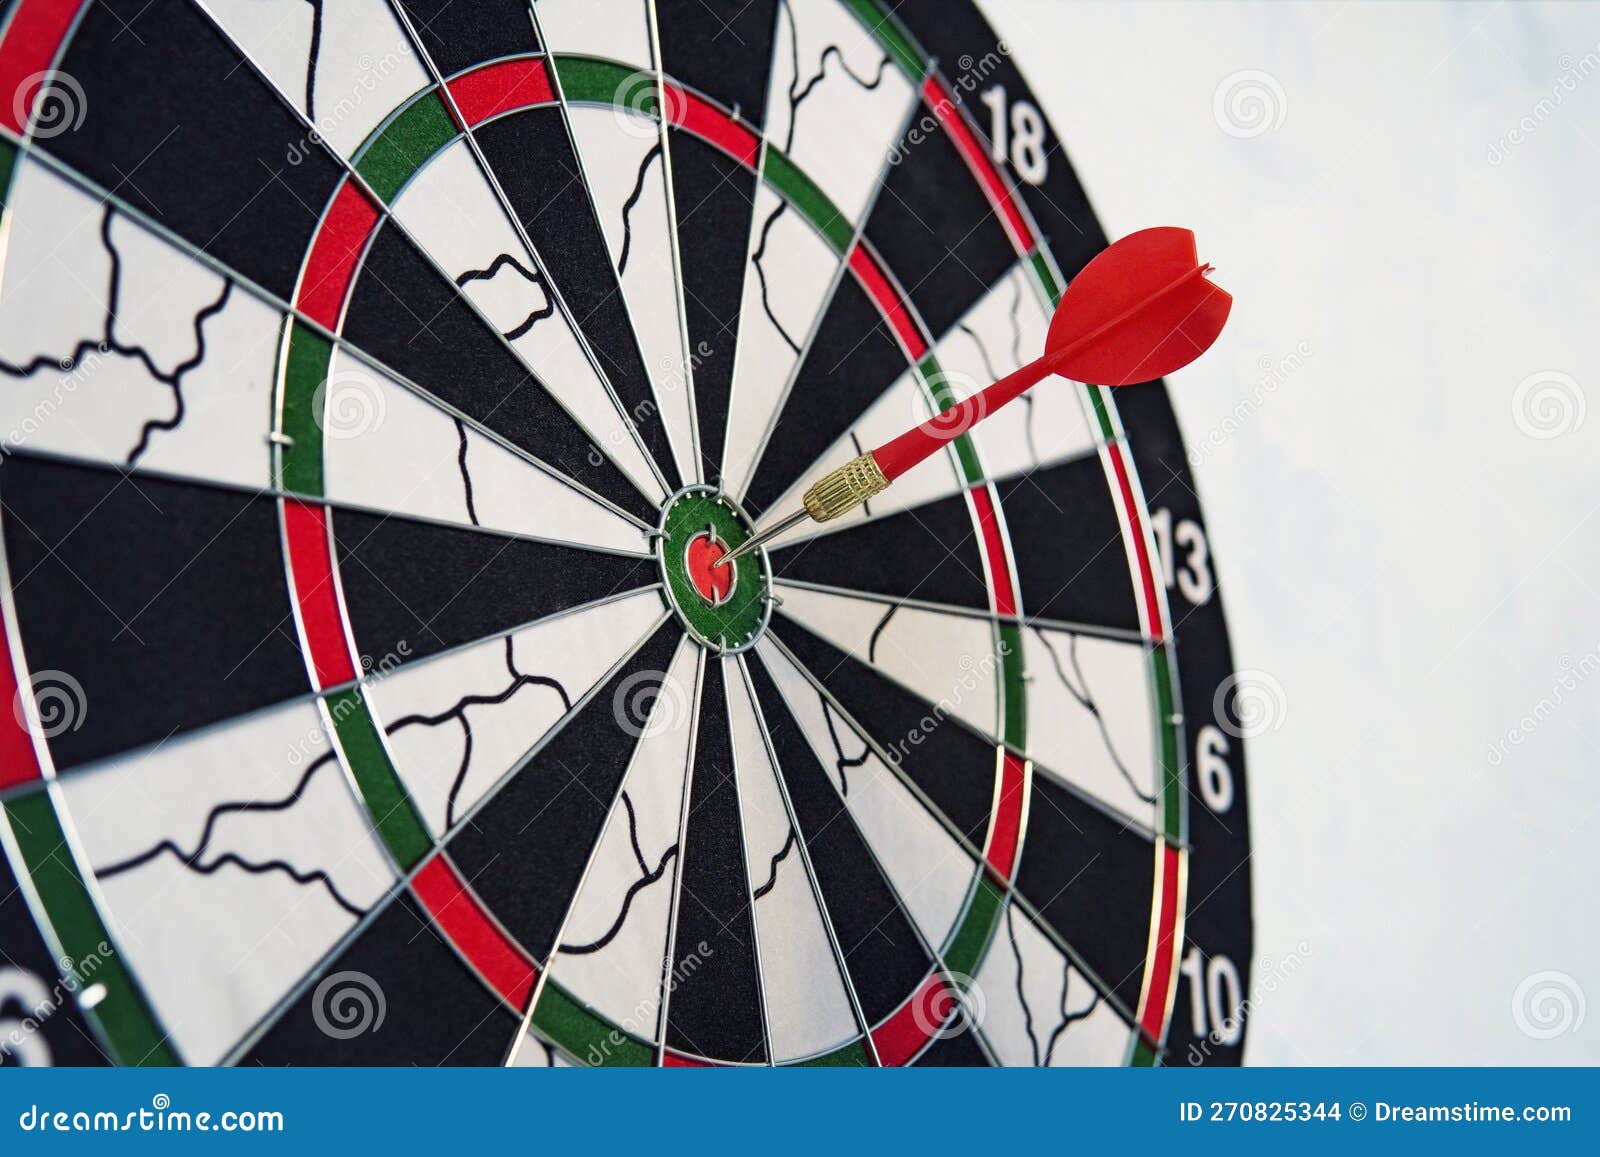 Close Red Dart on Board Right Frame. the Red Dart Hit the Target. Success Victory in the Competition Stock Photo - Image of perfect, aspiration: 270825344